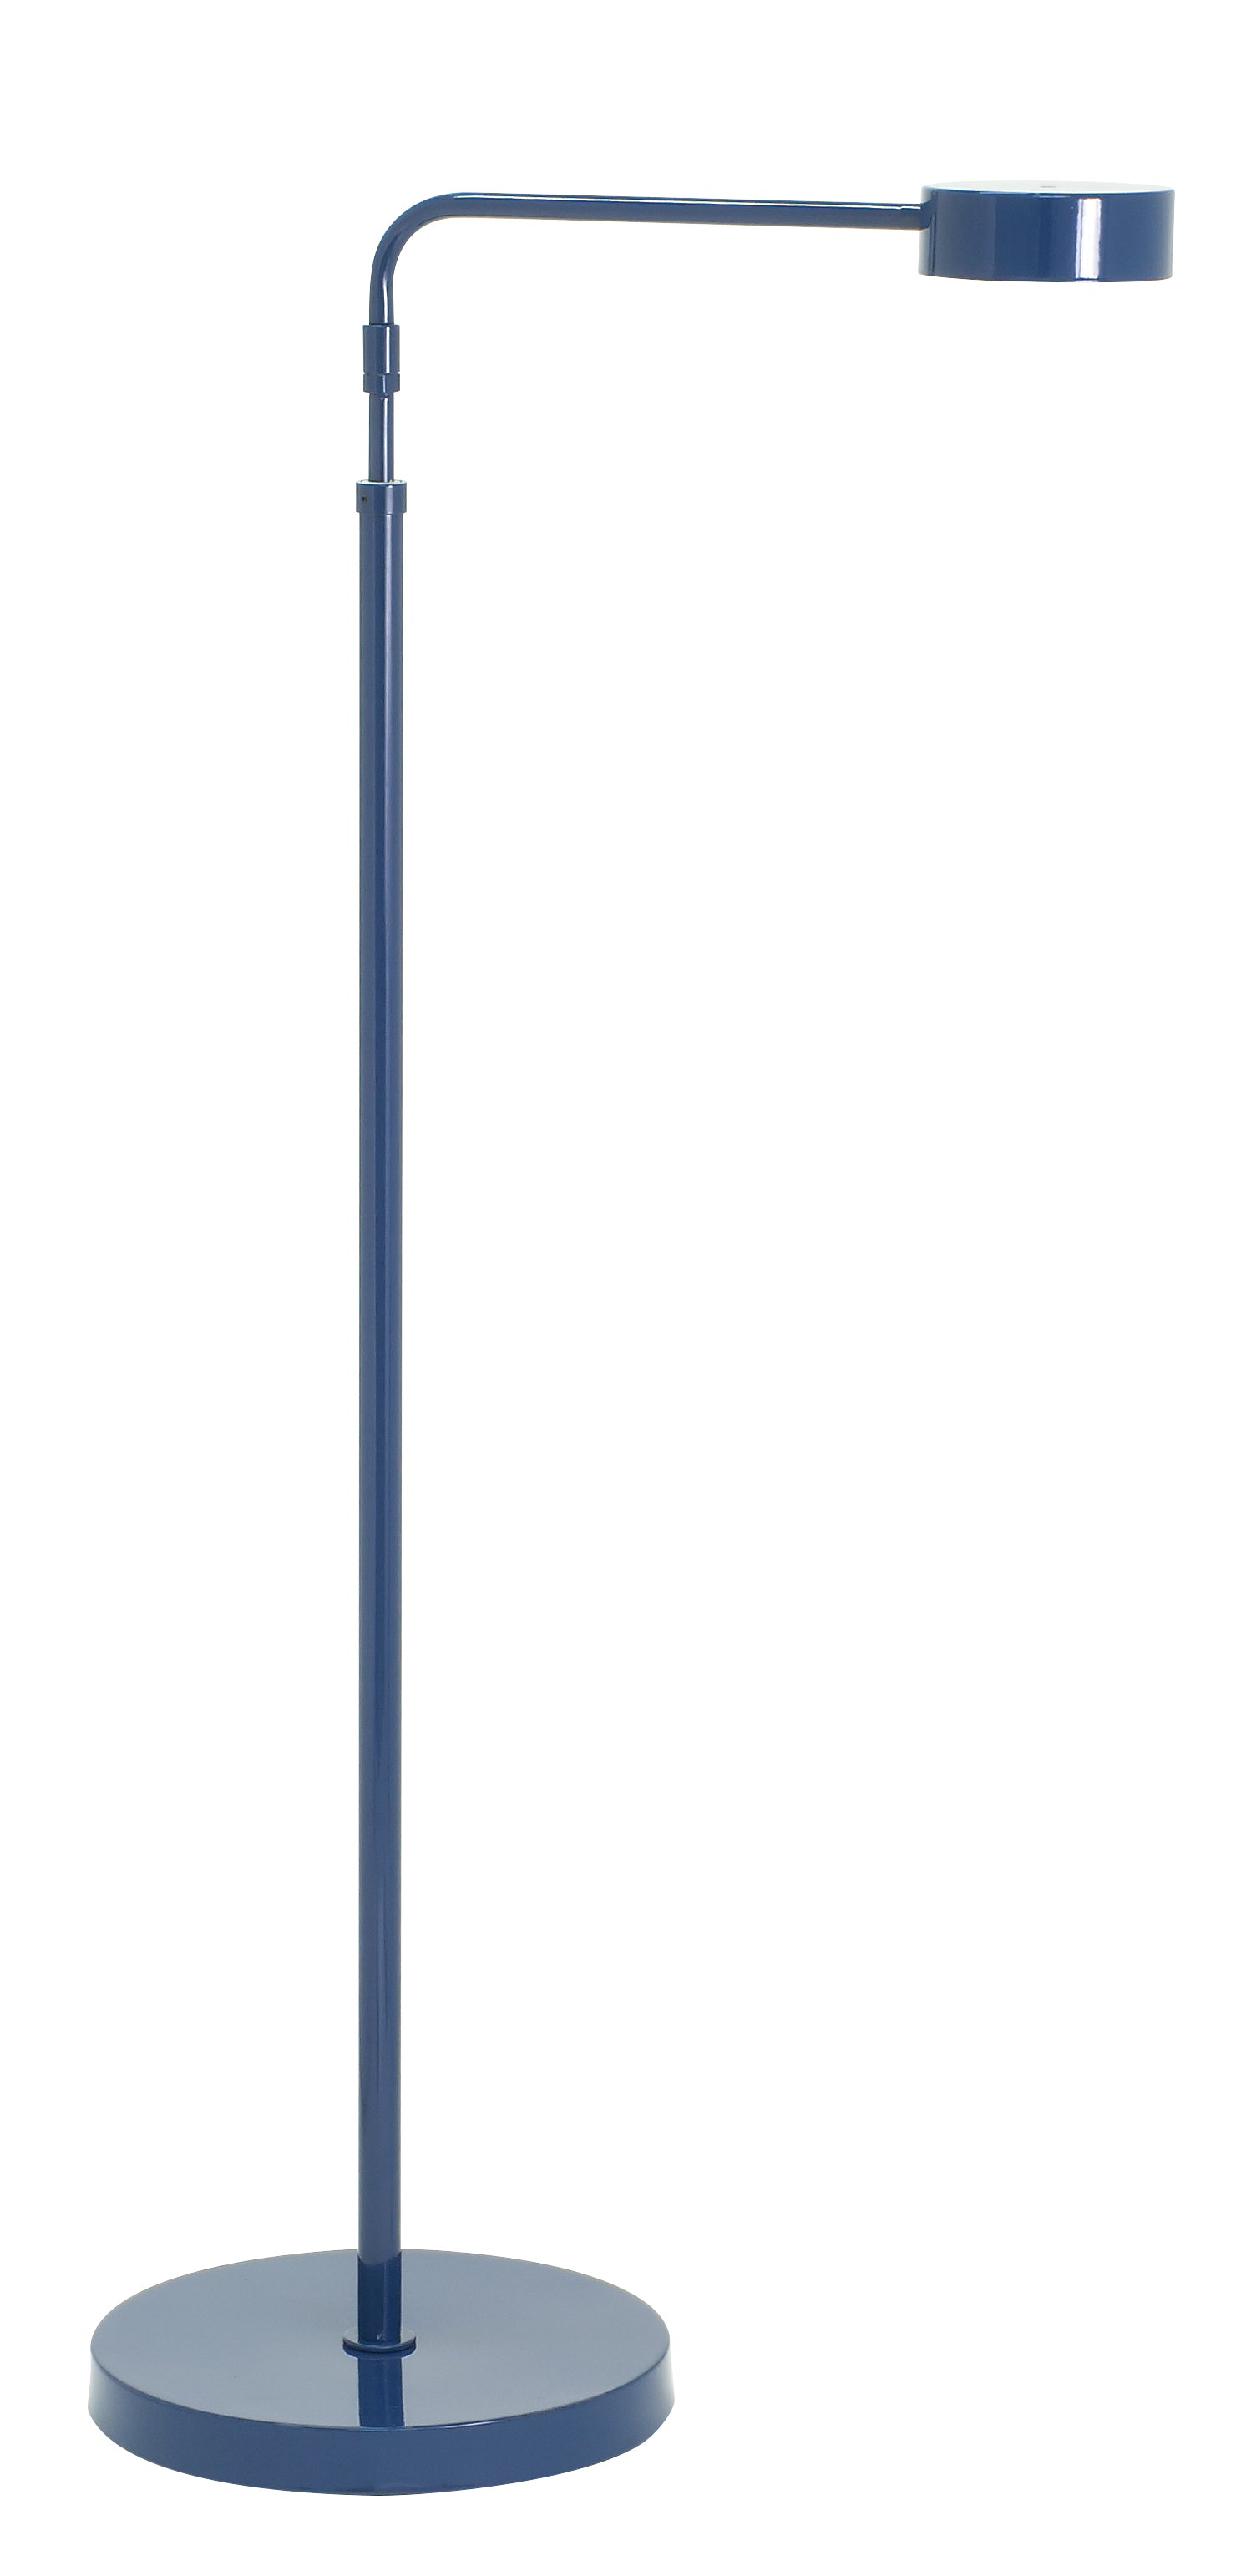 House of Troy Generation Adjustable LED Floor Lamp in Navy Blue G400-NB